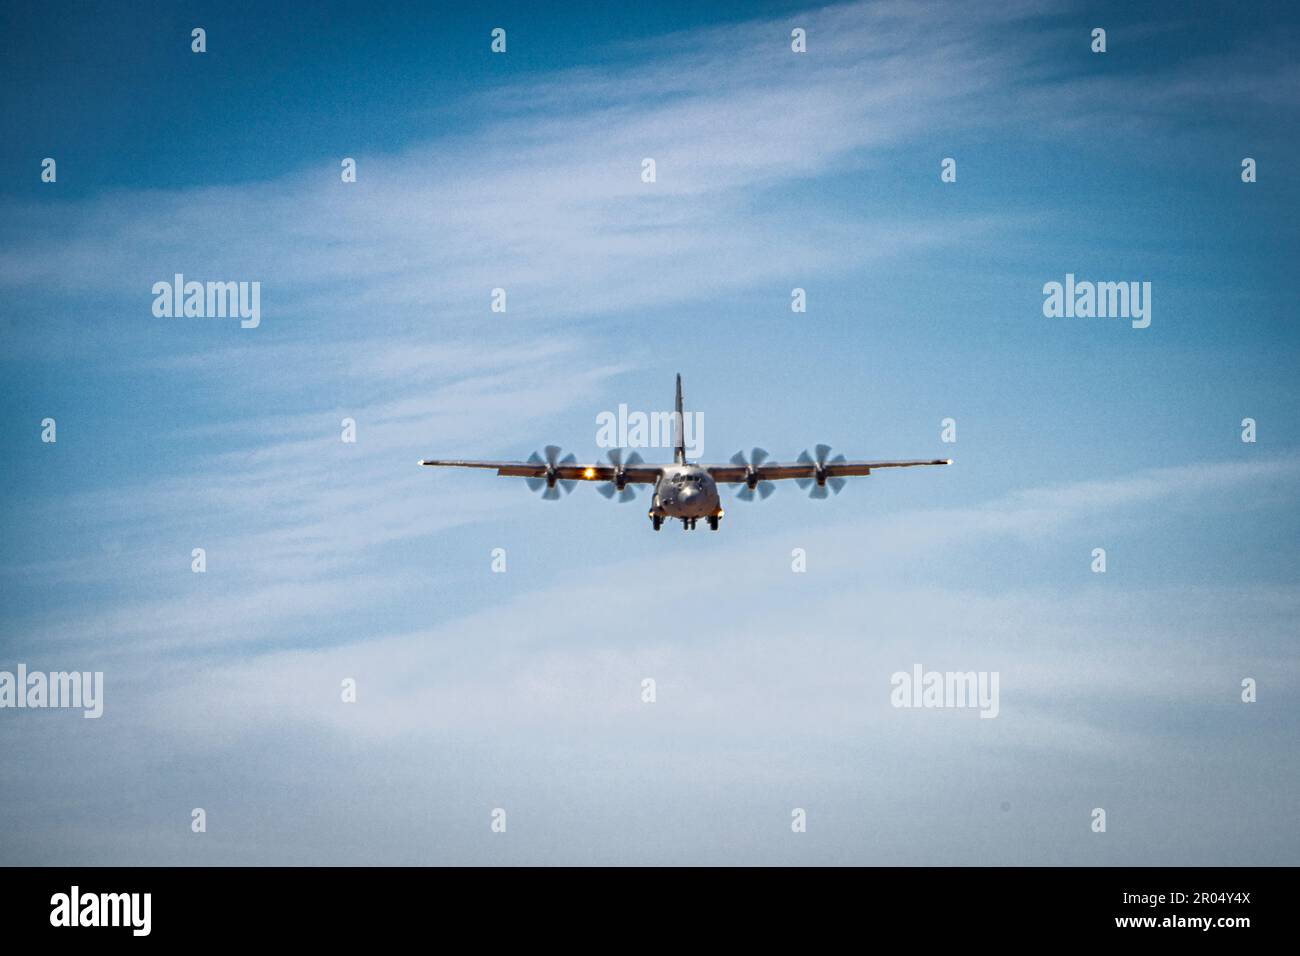 A U.S. Air Force C-130J Hercules aircraft assigned to the 61st Airlift Squadron, out of Little Rock Air Force Base, lands on Hubbard landing zone, at Fort Huachuca, Arizona while attending the Advanced Tactics Aircrew Course at the Advanced Airlift Tactics Training Center, April 18, 2023. Since 1983 the AATTC based out of St. Joseph, Missouri, has provided advanced tactical training to airlift aircrews from the Air National Guard, Air Force Reserve Command, Air Mobility Command, U.S. Marine Corps and 17 allied nations. (U.S. Air Force photo by Master Sgt. Patrick Evenson) Stock Photo